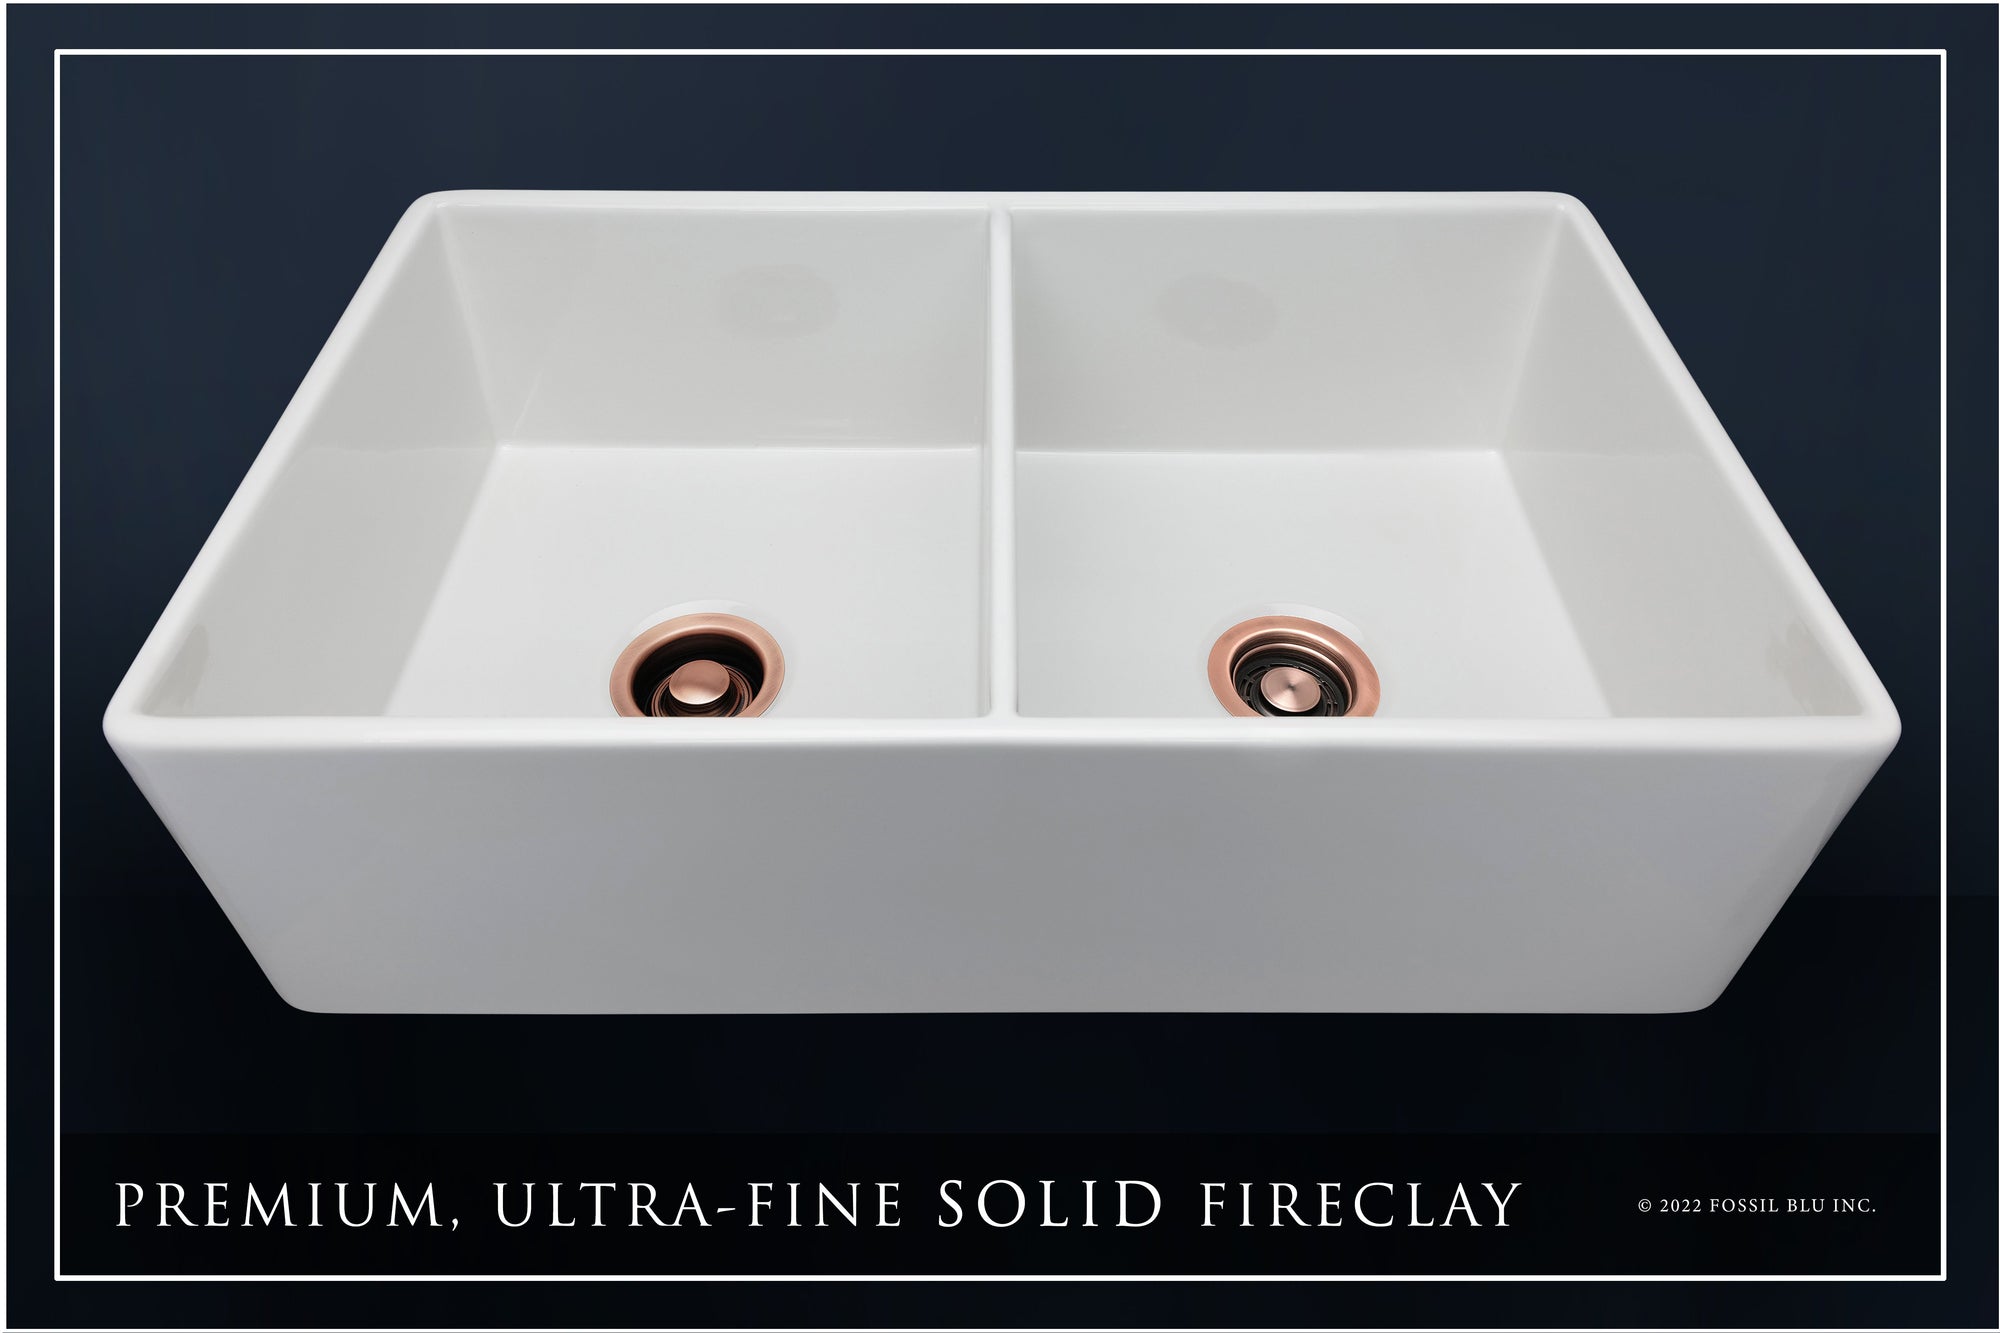 FSW1003AC LUXURY 33-INCH SOLID FIRECLAY FARMHOUSE SINK IN WHITE, ANTIQUE COPPER ACCS, FLAT FRONT